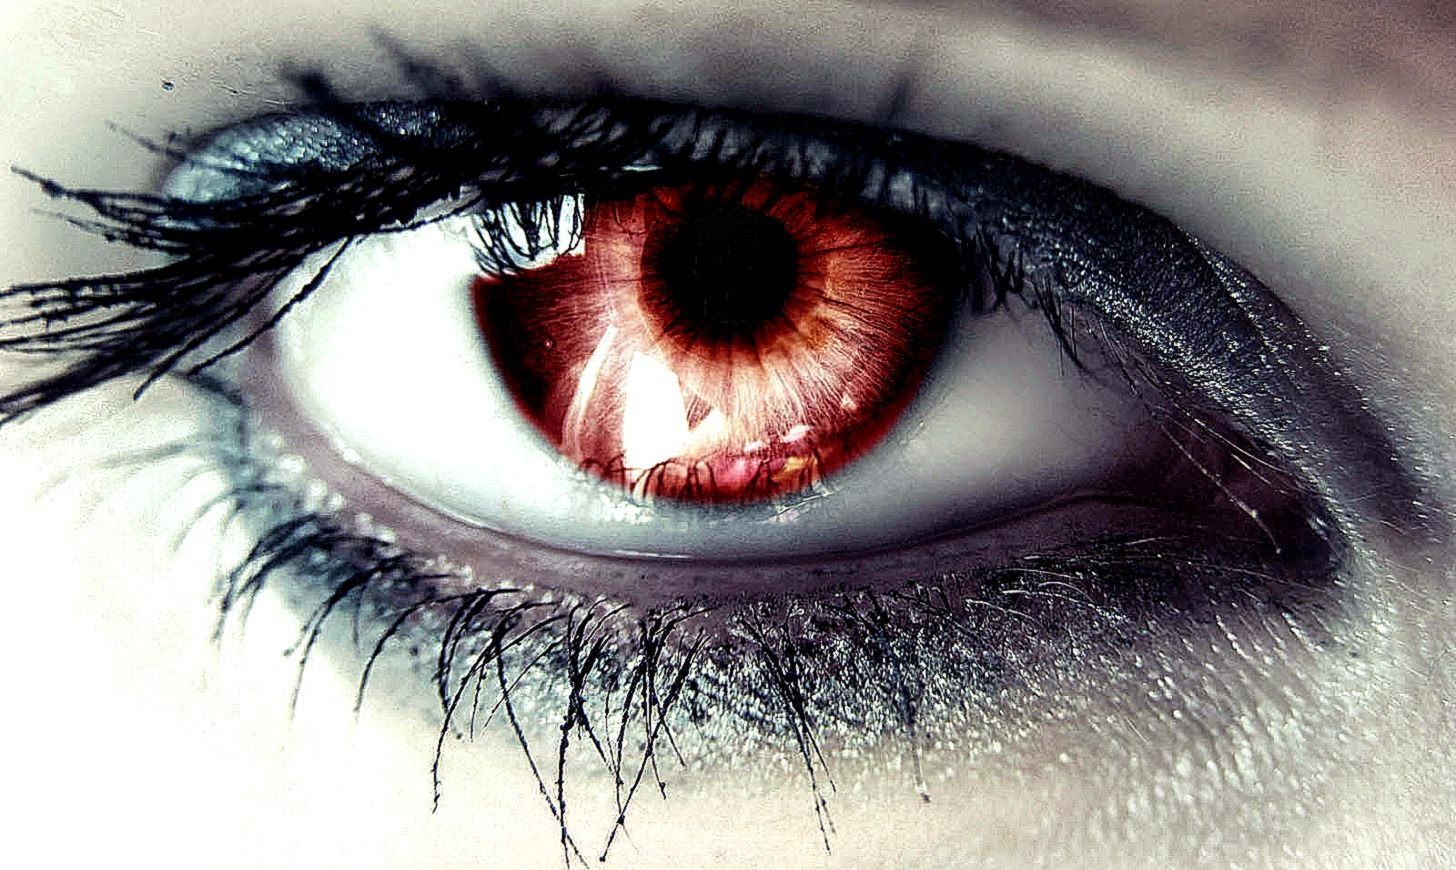 A close up of a person's eye with red irises - Eyes